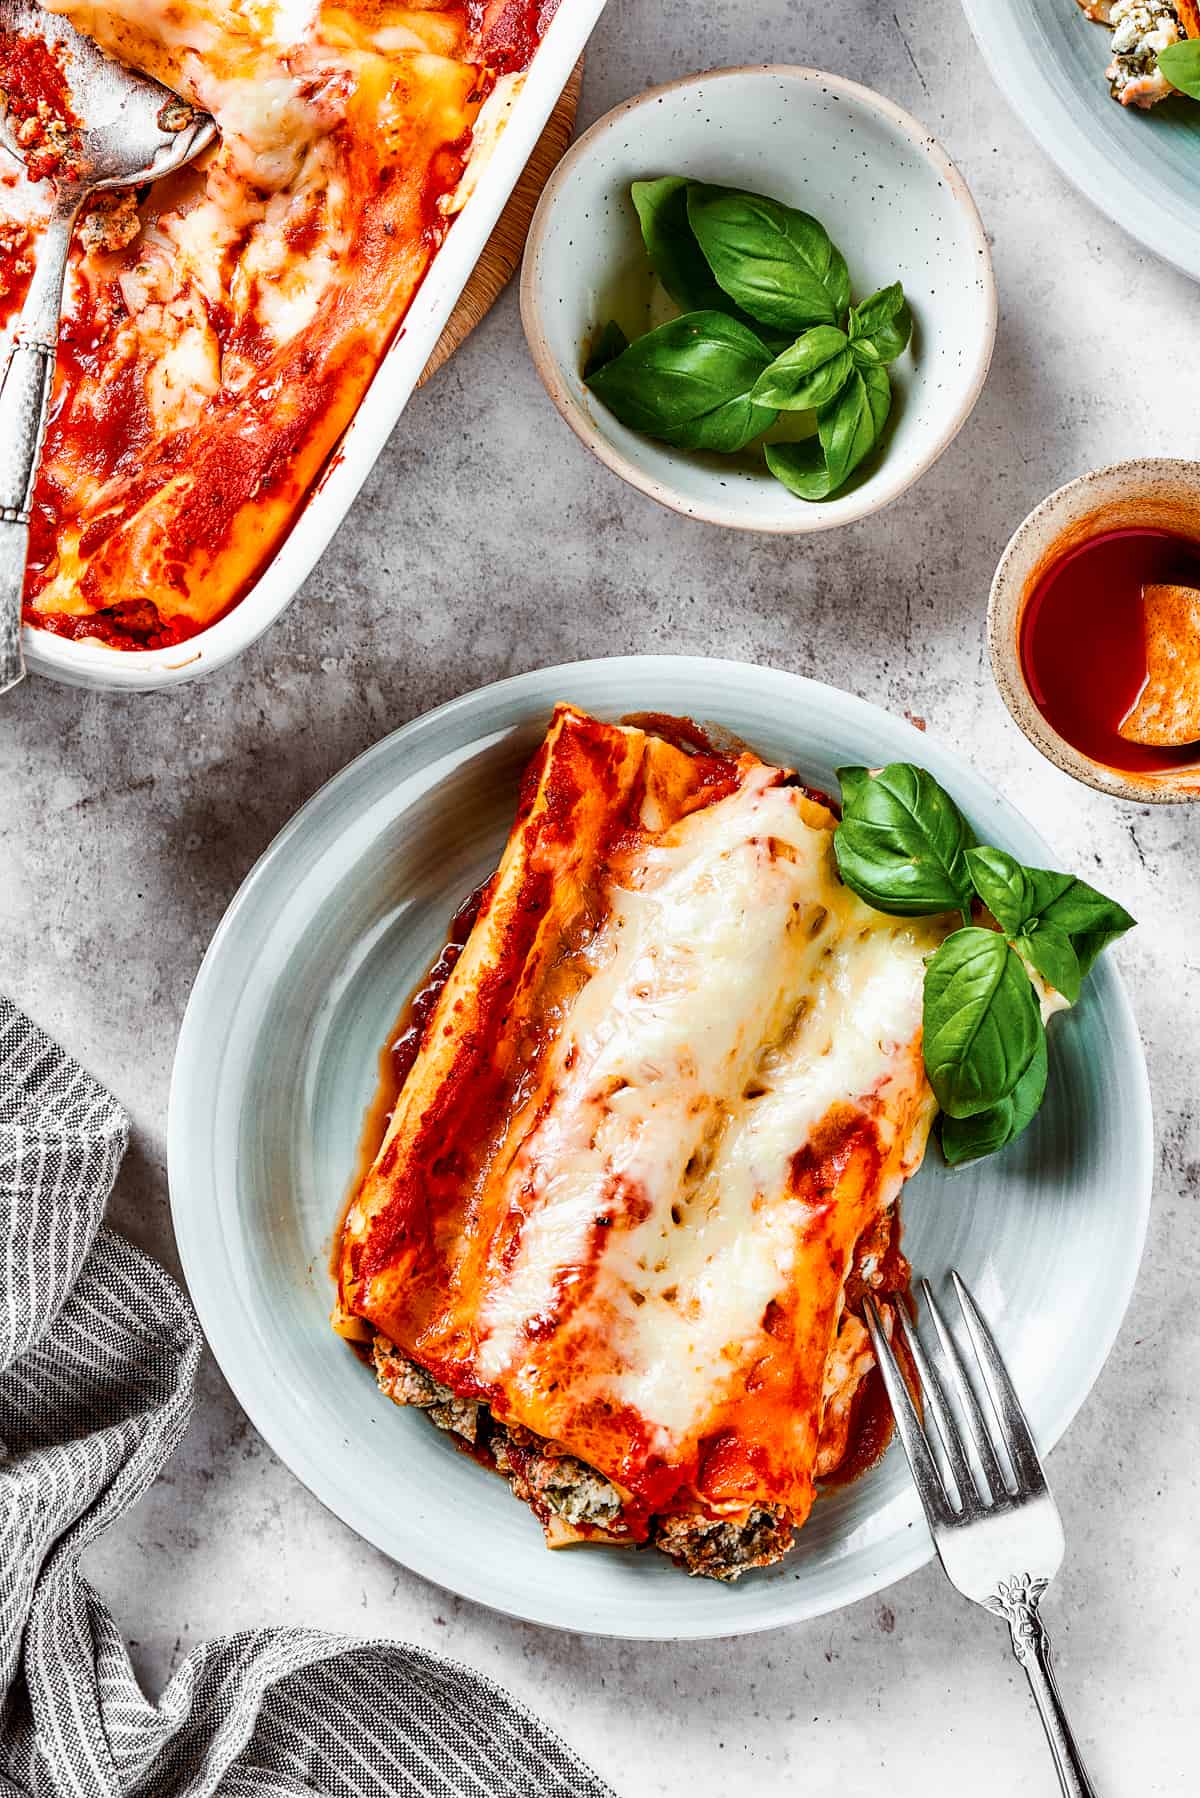 Overhead shot of stuffed manicotti on a plate, next to a casserole dish with a serving spoon resting in it.